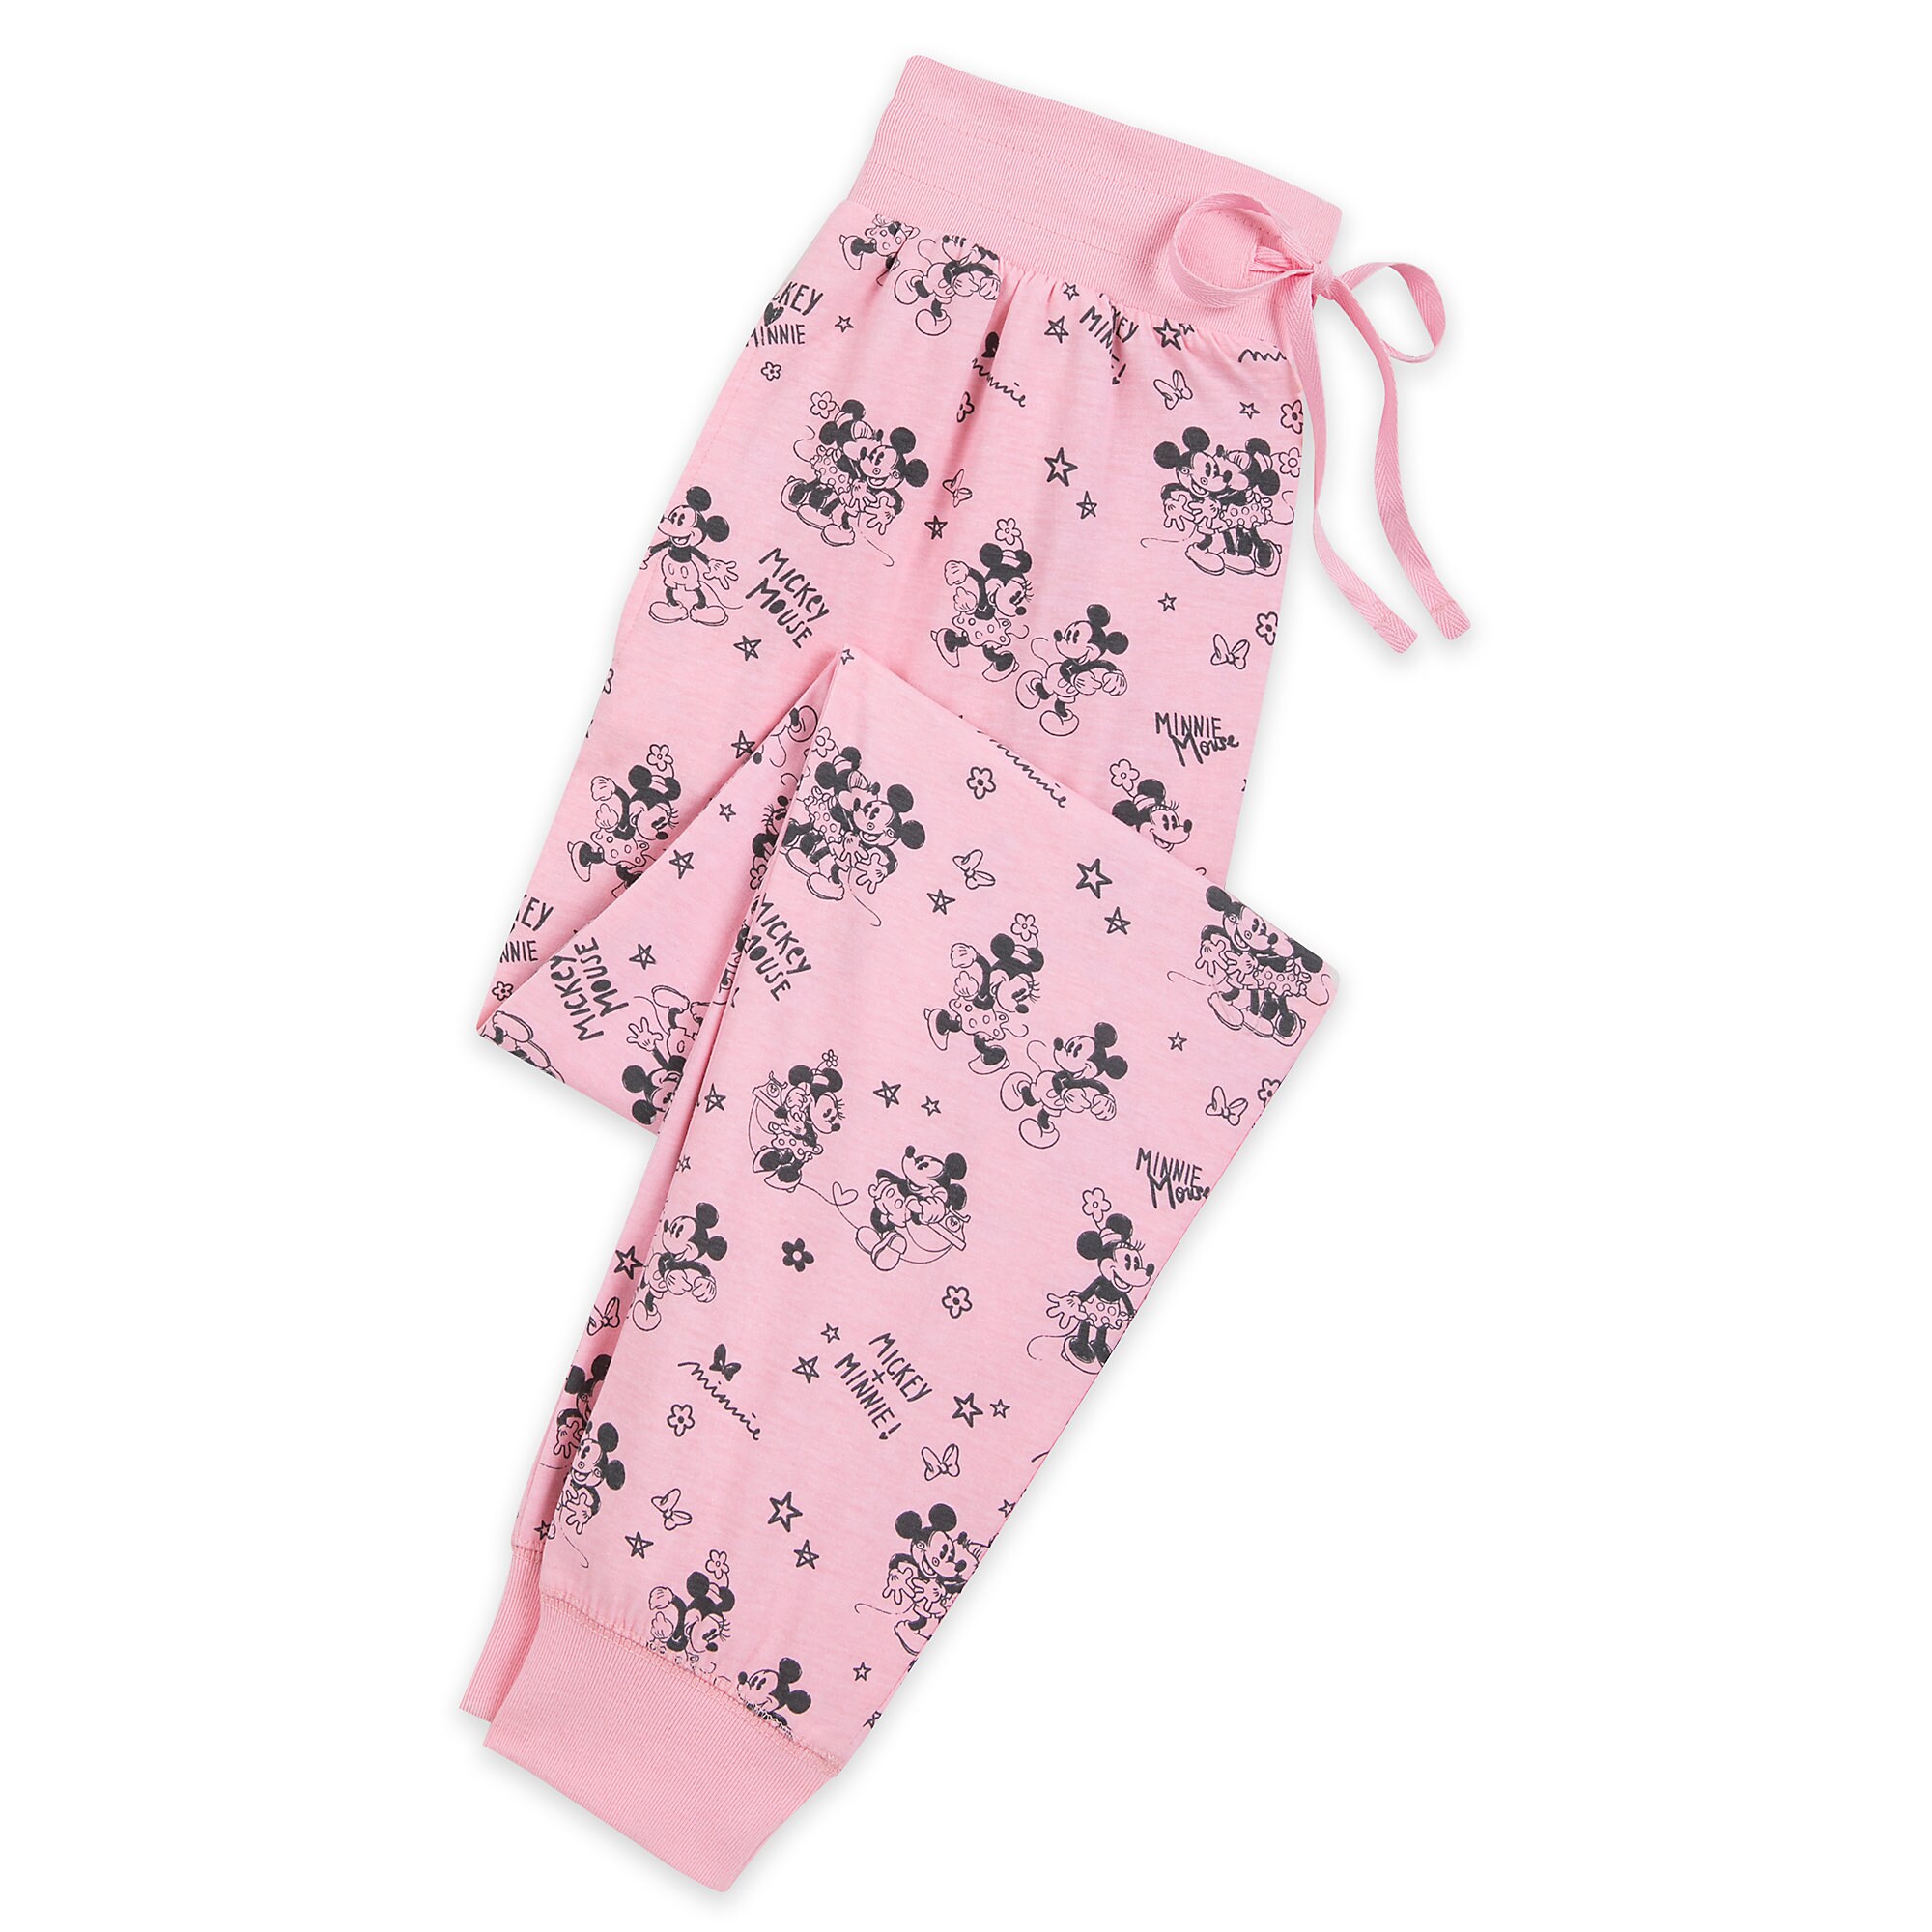 Mickey and Minnie Mouse Jogger Pants for Women